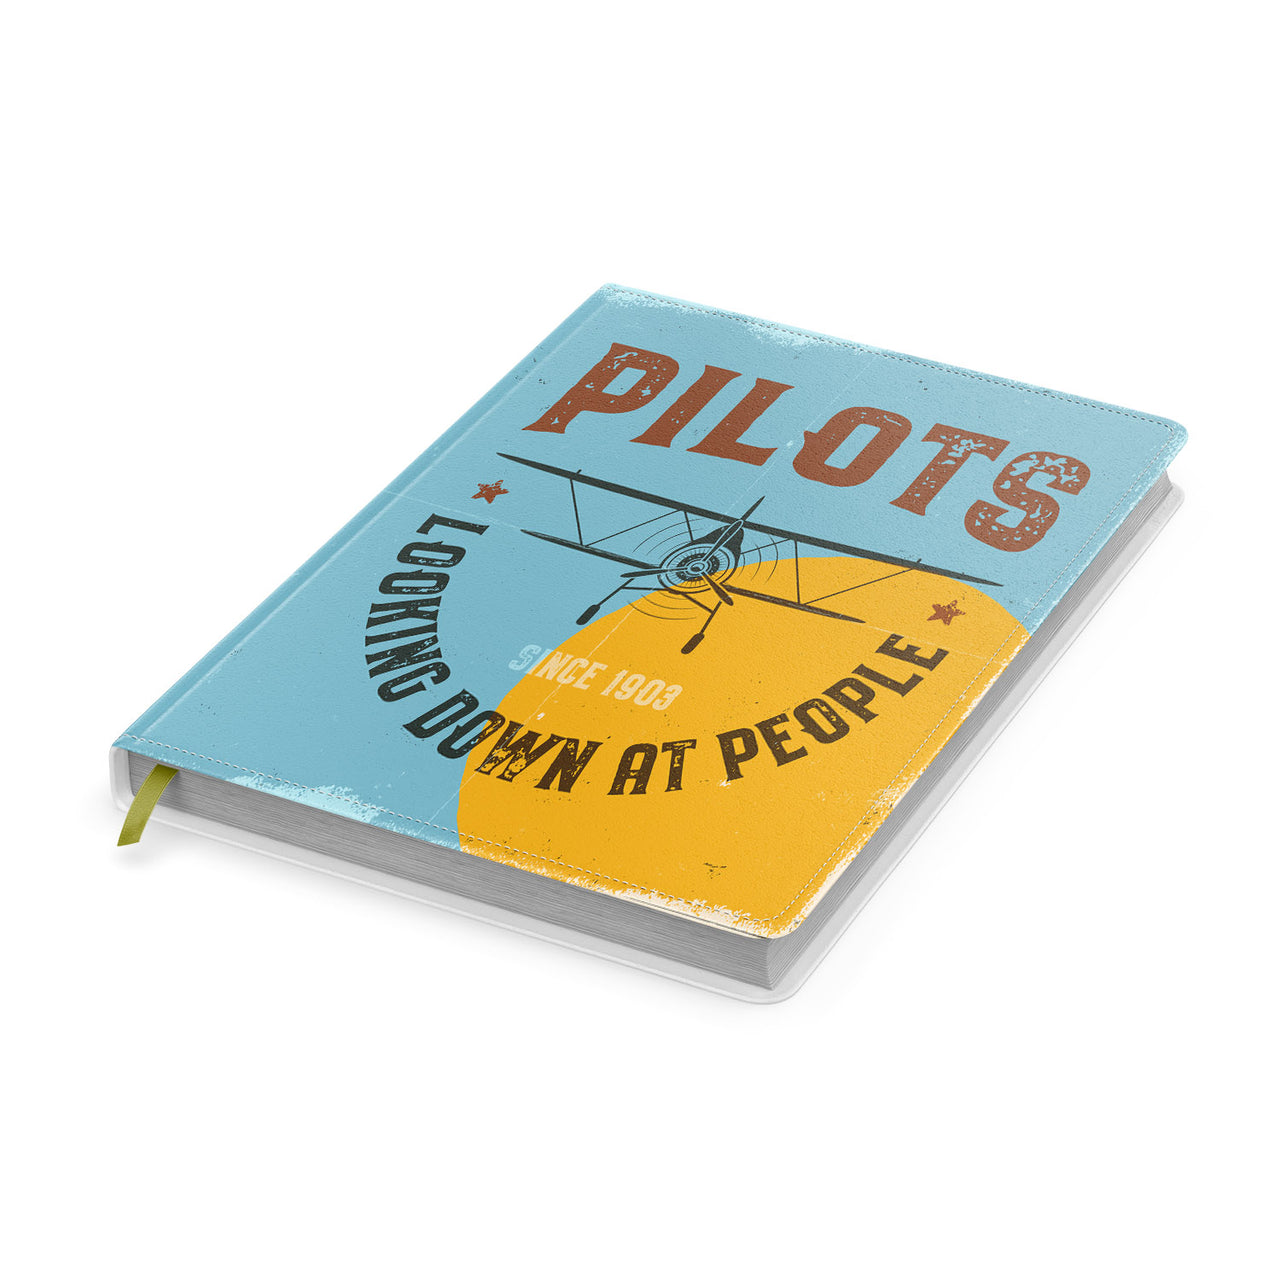 Pilots Looking Down at People Since 1903 Designed Notebooks